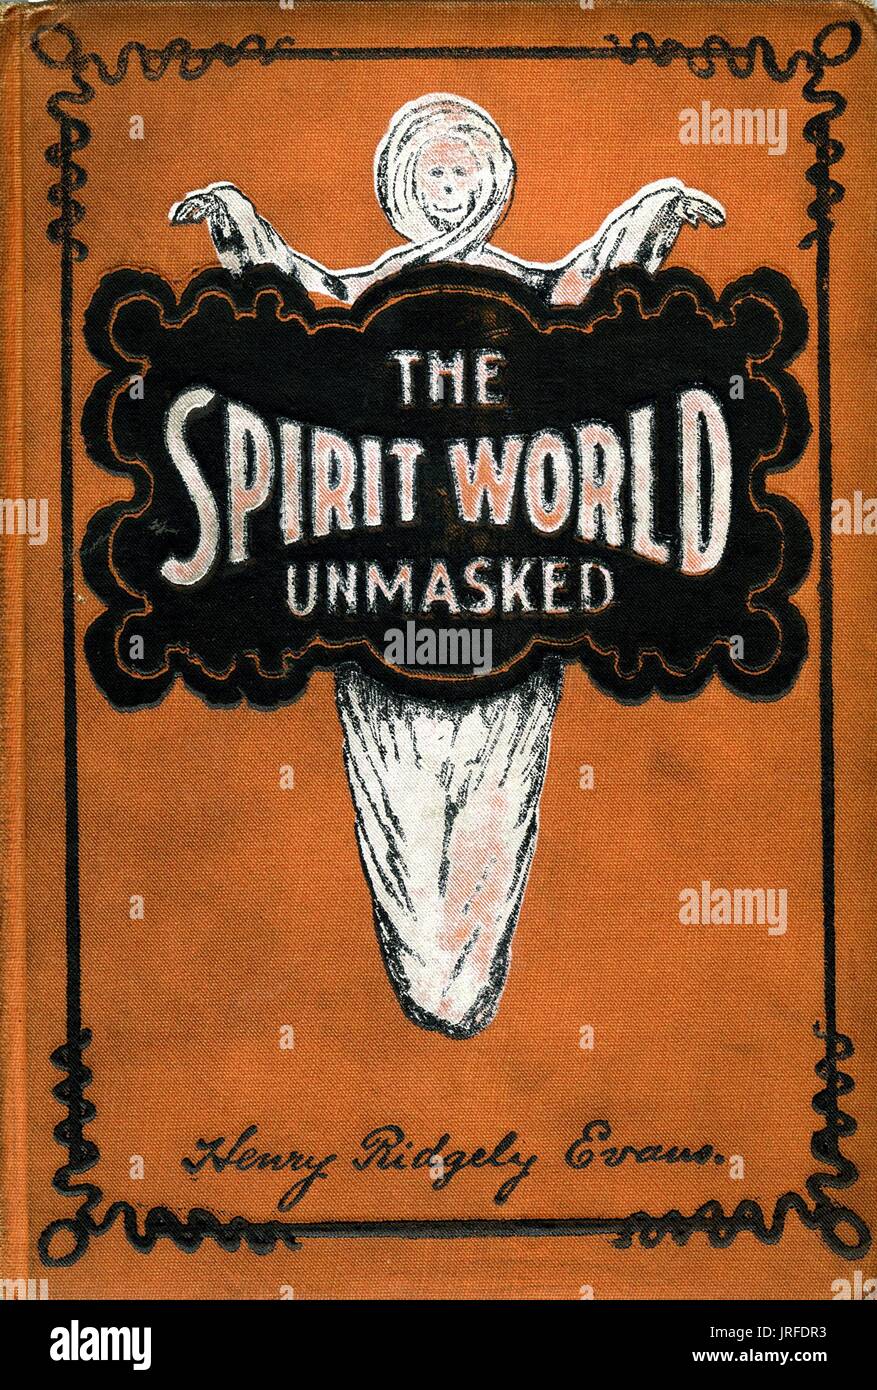 The spirit world unmasked, occult book cover, with an image of a ghost, its arms clutching a black cloud in which the book title is printed, 1900. Stock Photo